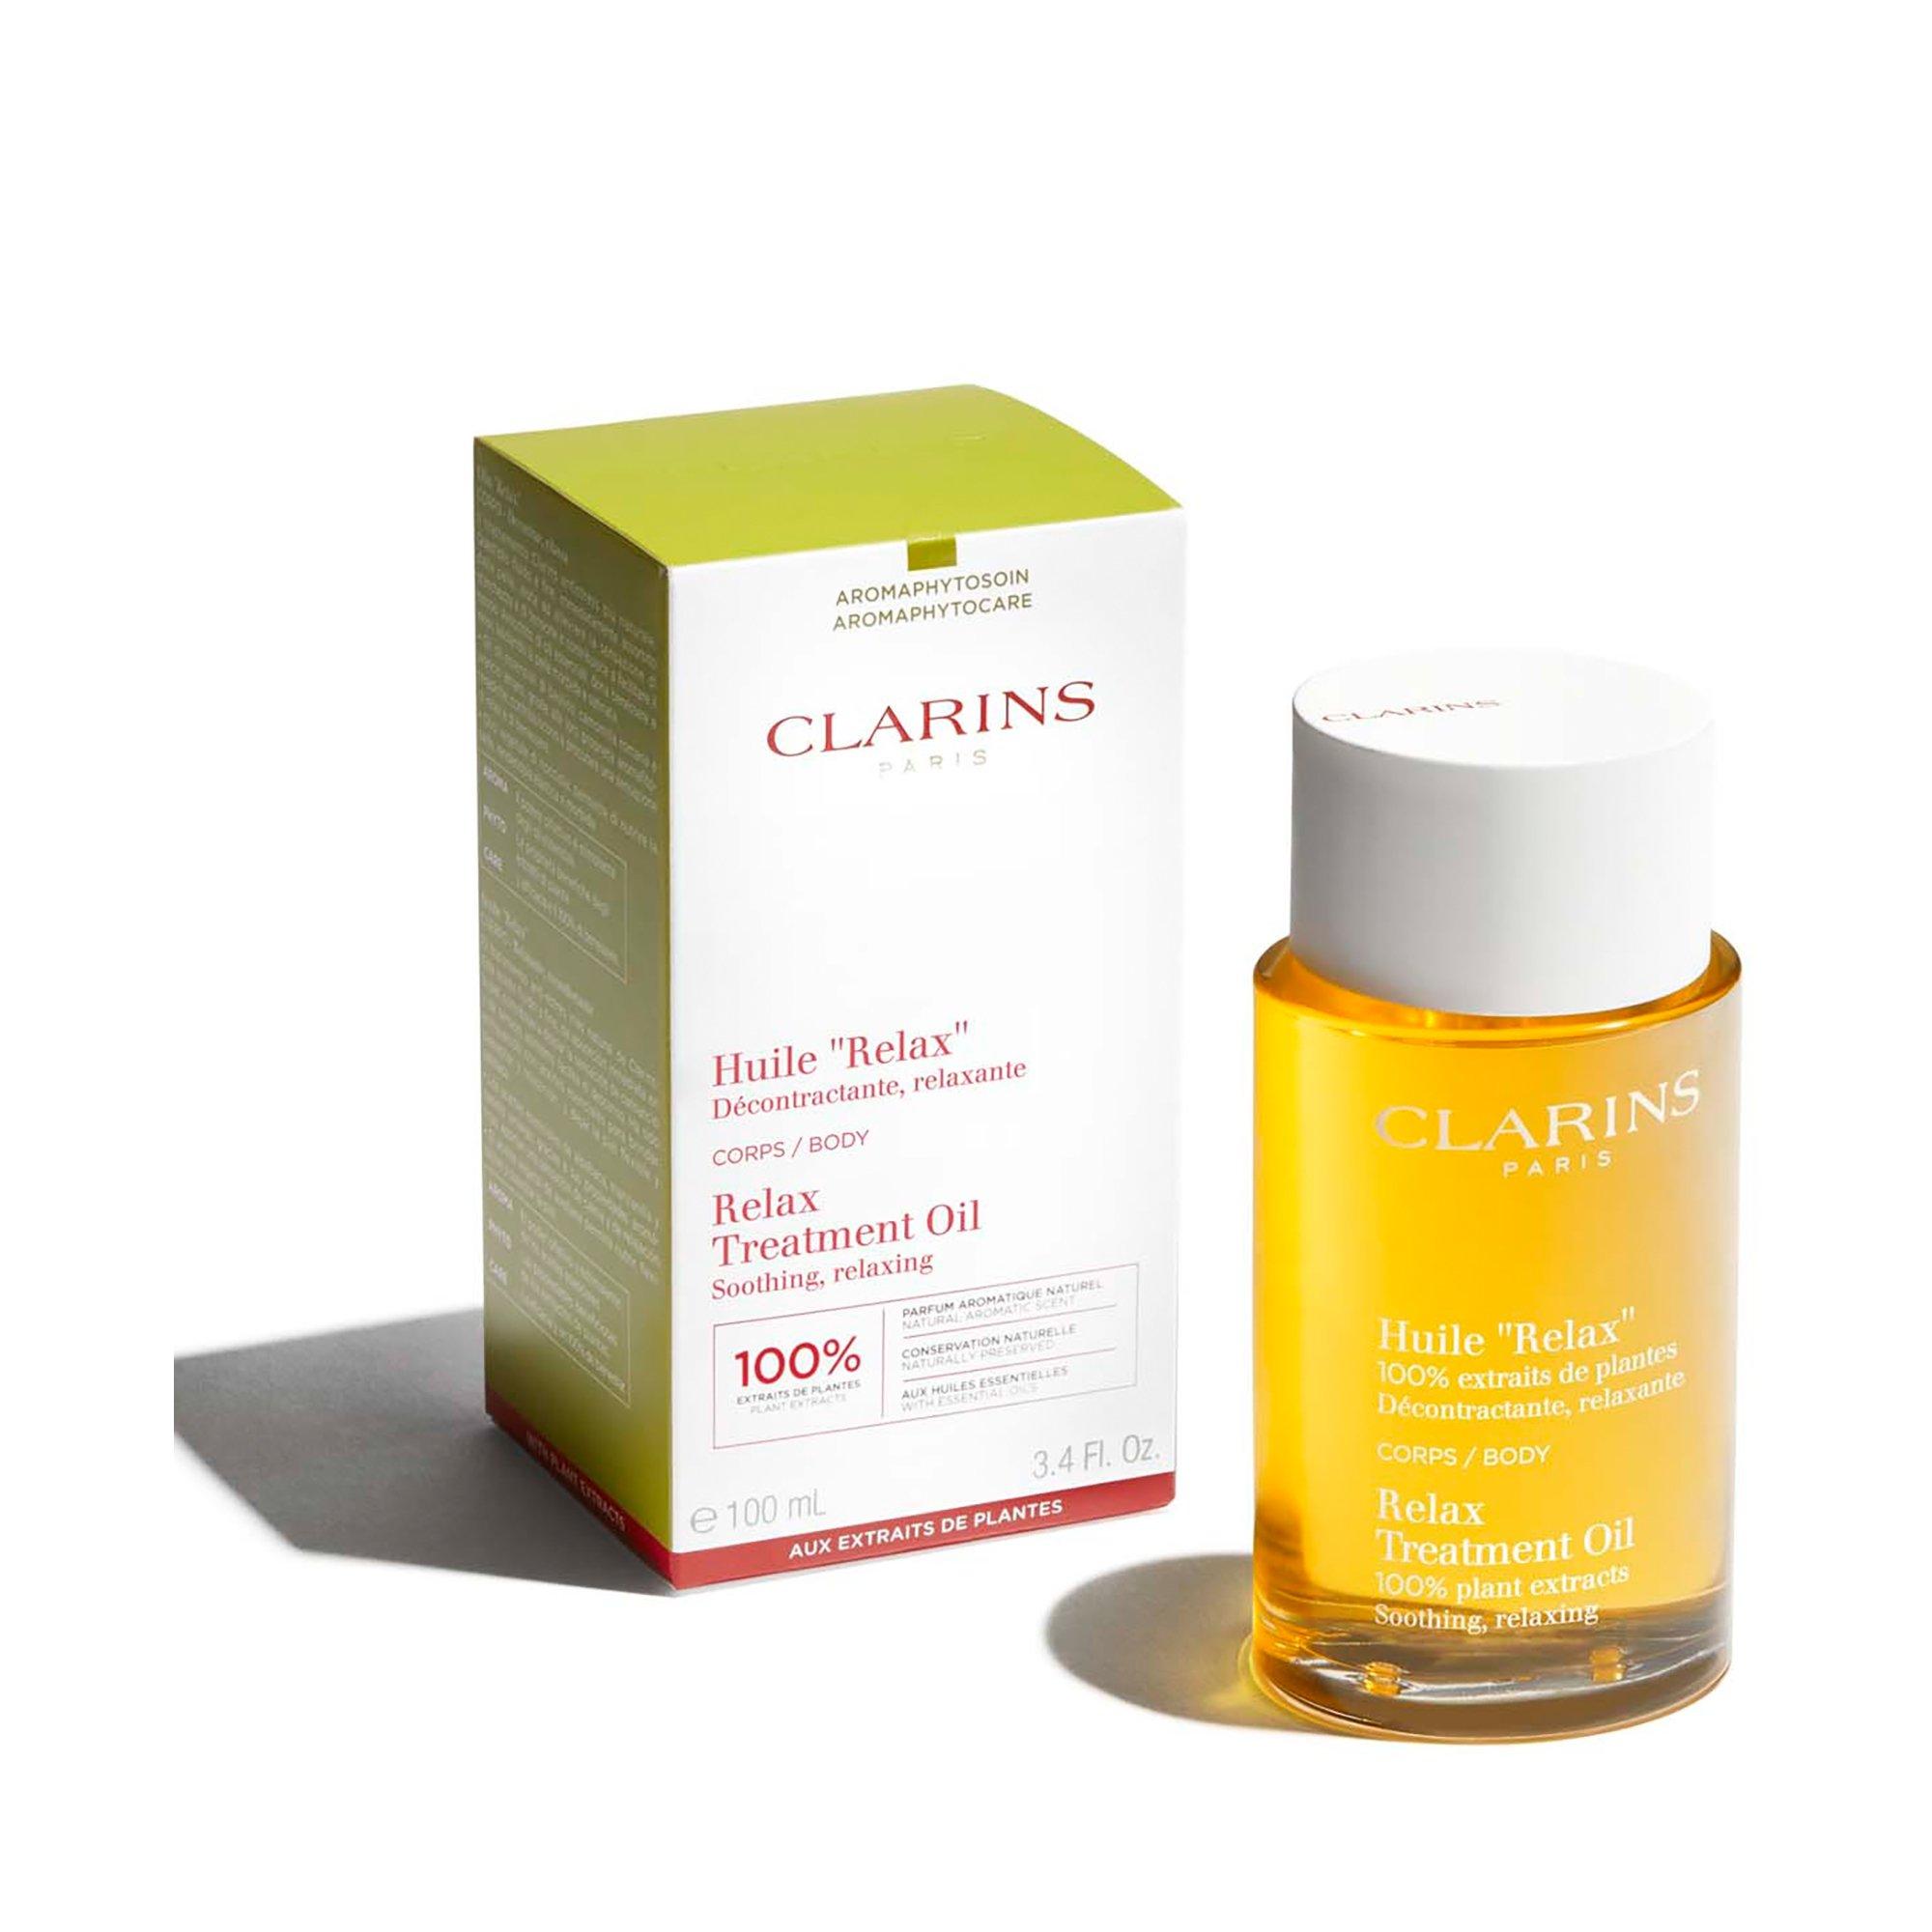 CLARINS SOINS EXFOLIANTS Huile "Relax" 